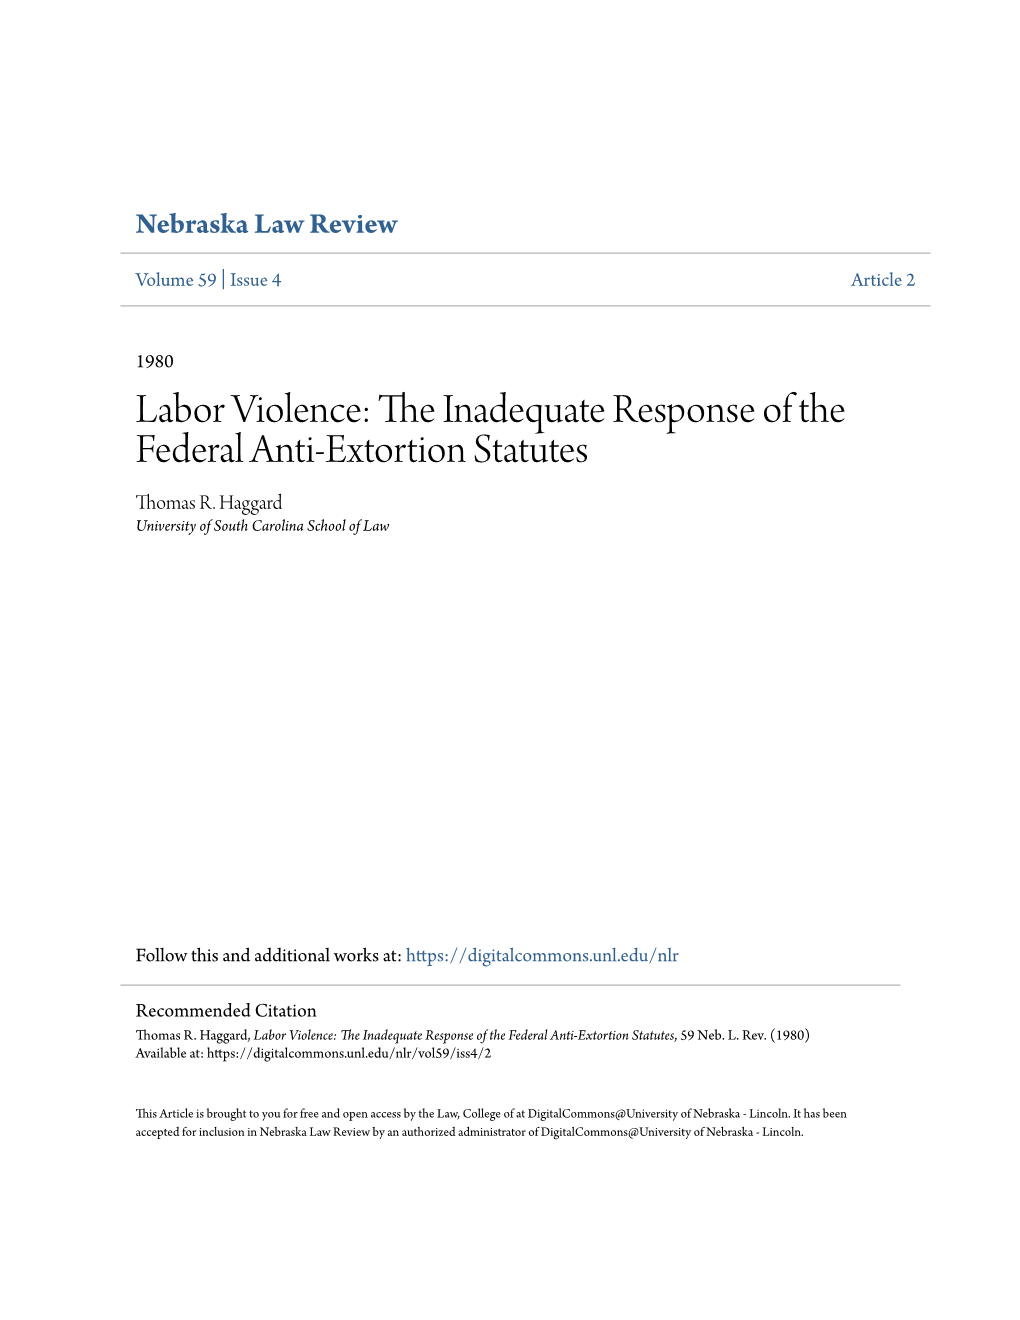 The Inadequate Response of the Federal Anti-Extortion Statutes, 59 Neb